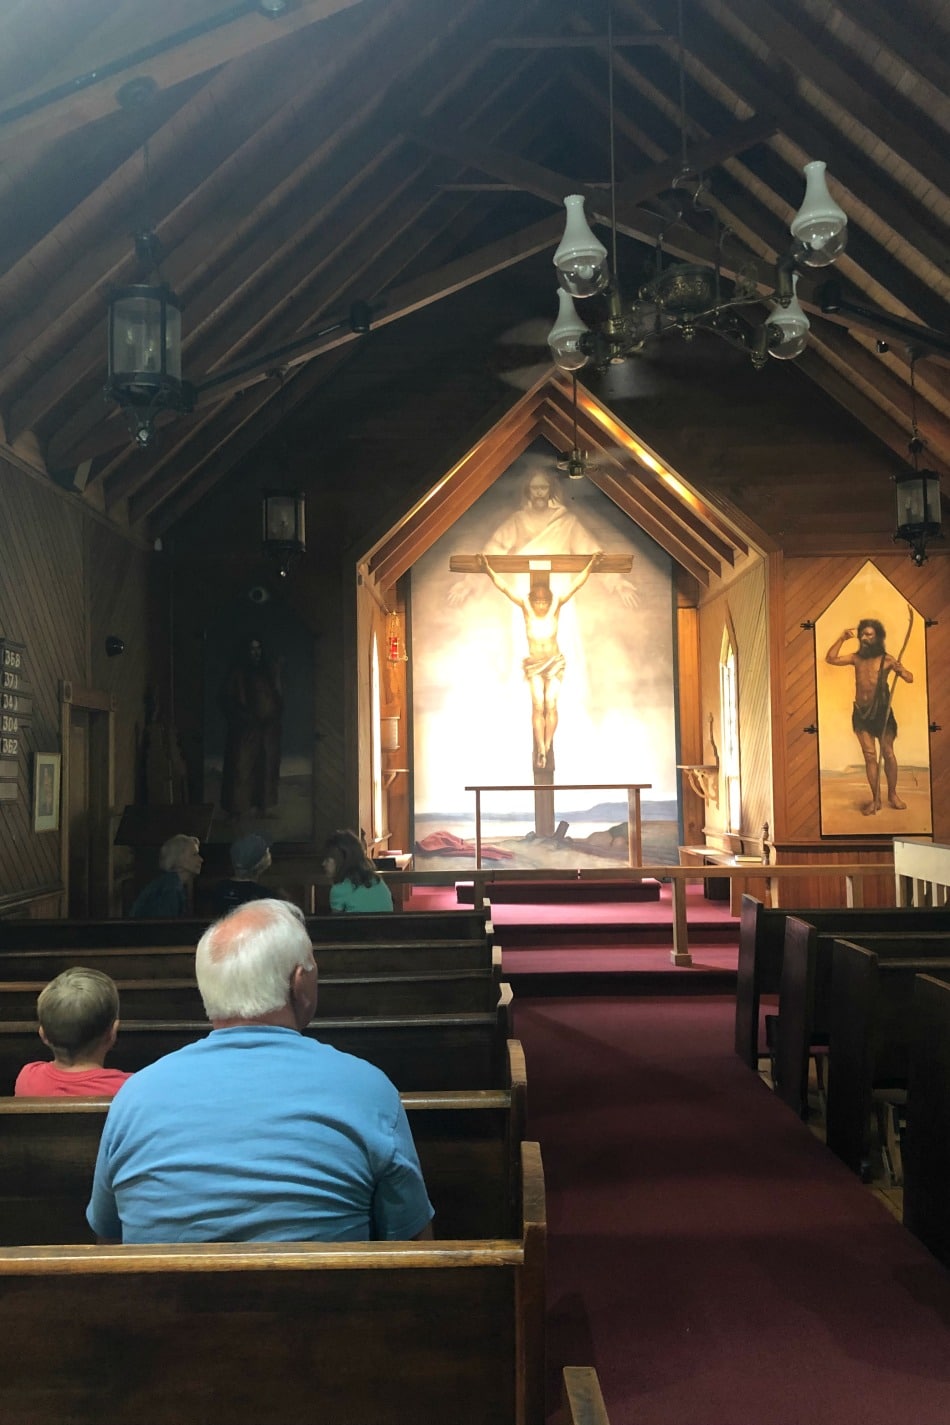 Visiting The Frescos in West Jefferson, NC | Growing Up Herbal | We finally made it to see the fresco paintings housed in a couple of old Episcopal churches in West Jefferson, North Carolina for our Michaelangelo artist study!